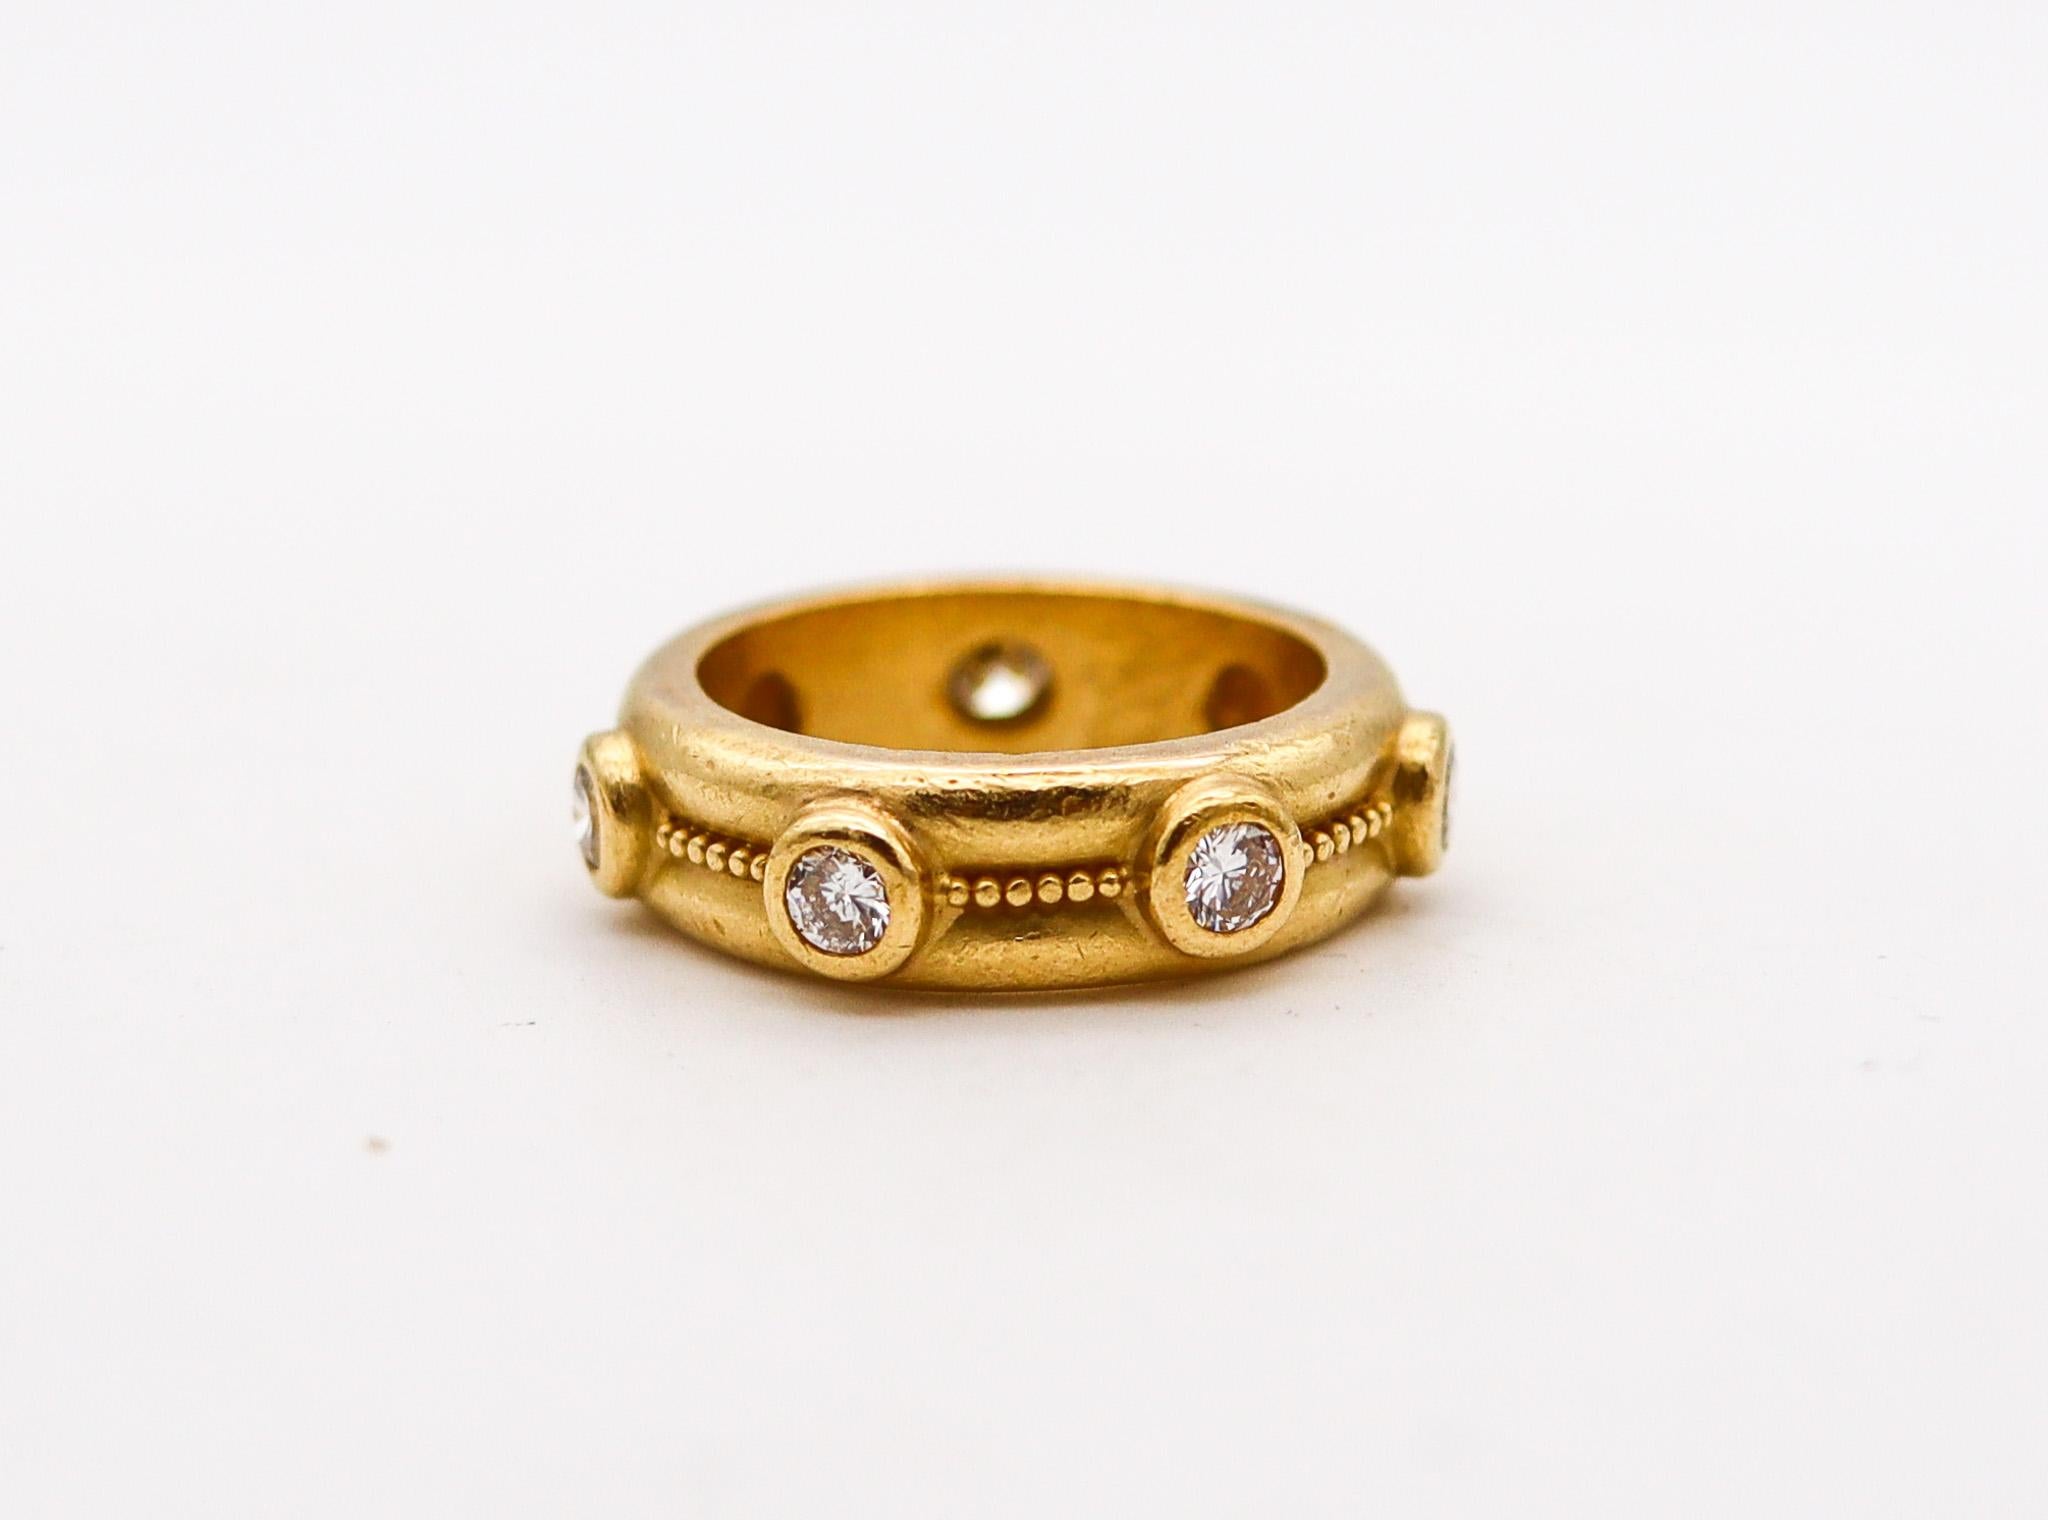 Eternity ring designed by Reinstein-Ross.

Very beautiful eternity ring, created in New York city by the exclusive jewelry designers of Reinstein-Ross. This ring has been crafted in solid rich yellow gold of 22 karats (.916/.999 Au) with a delicate